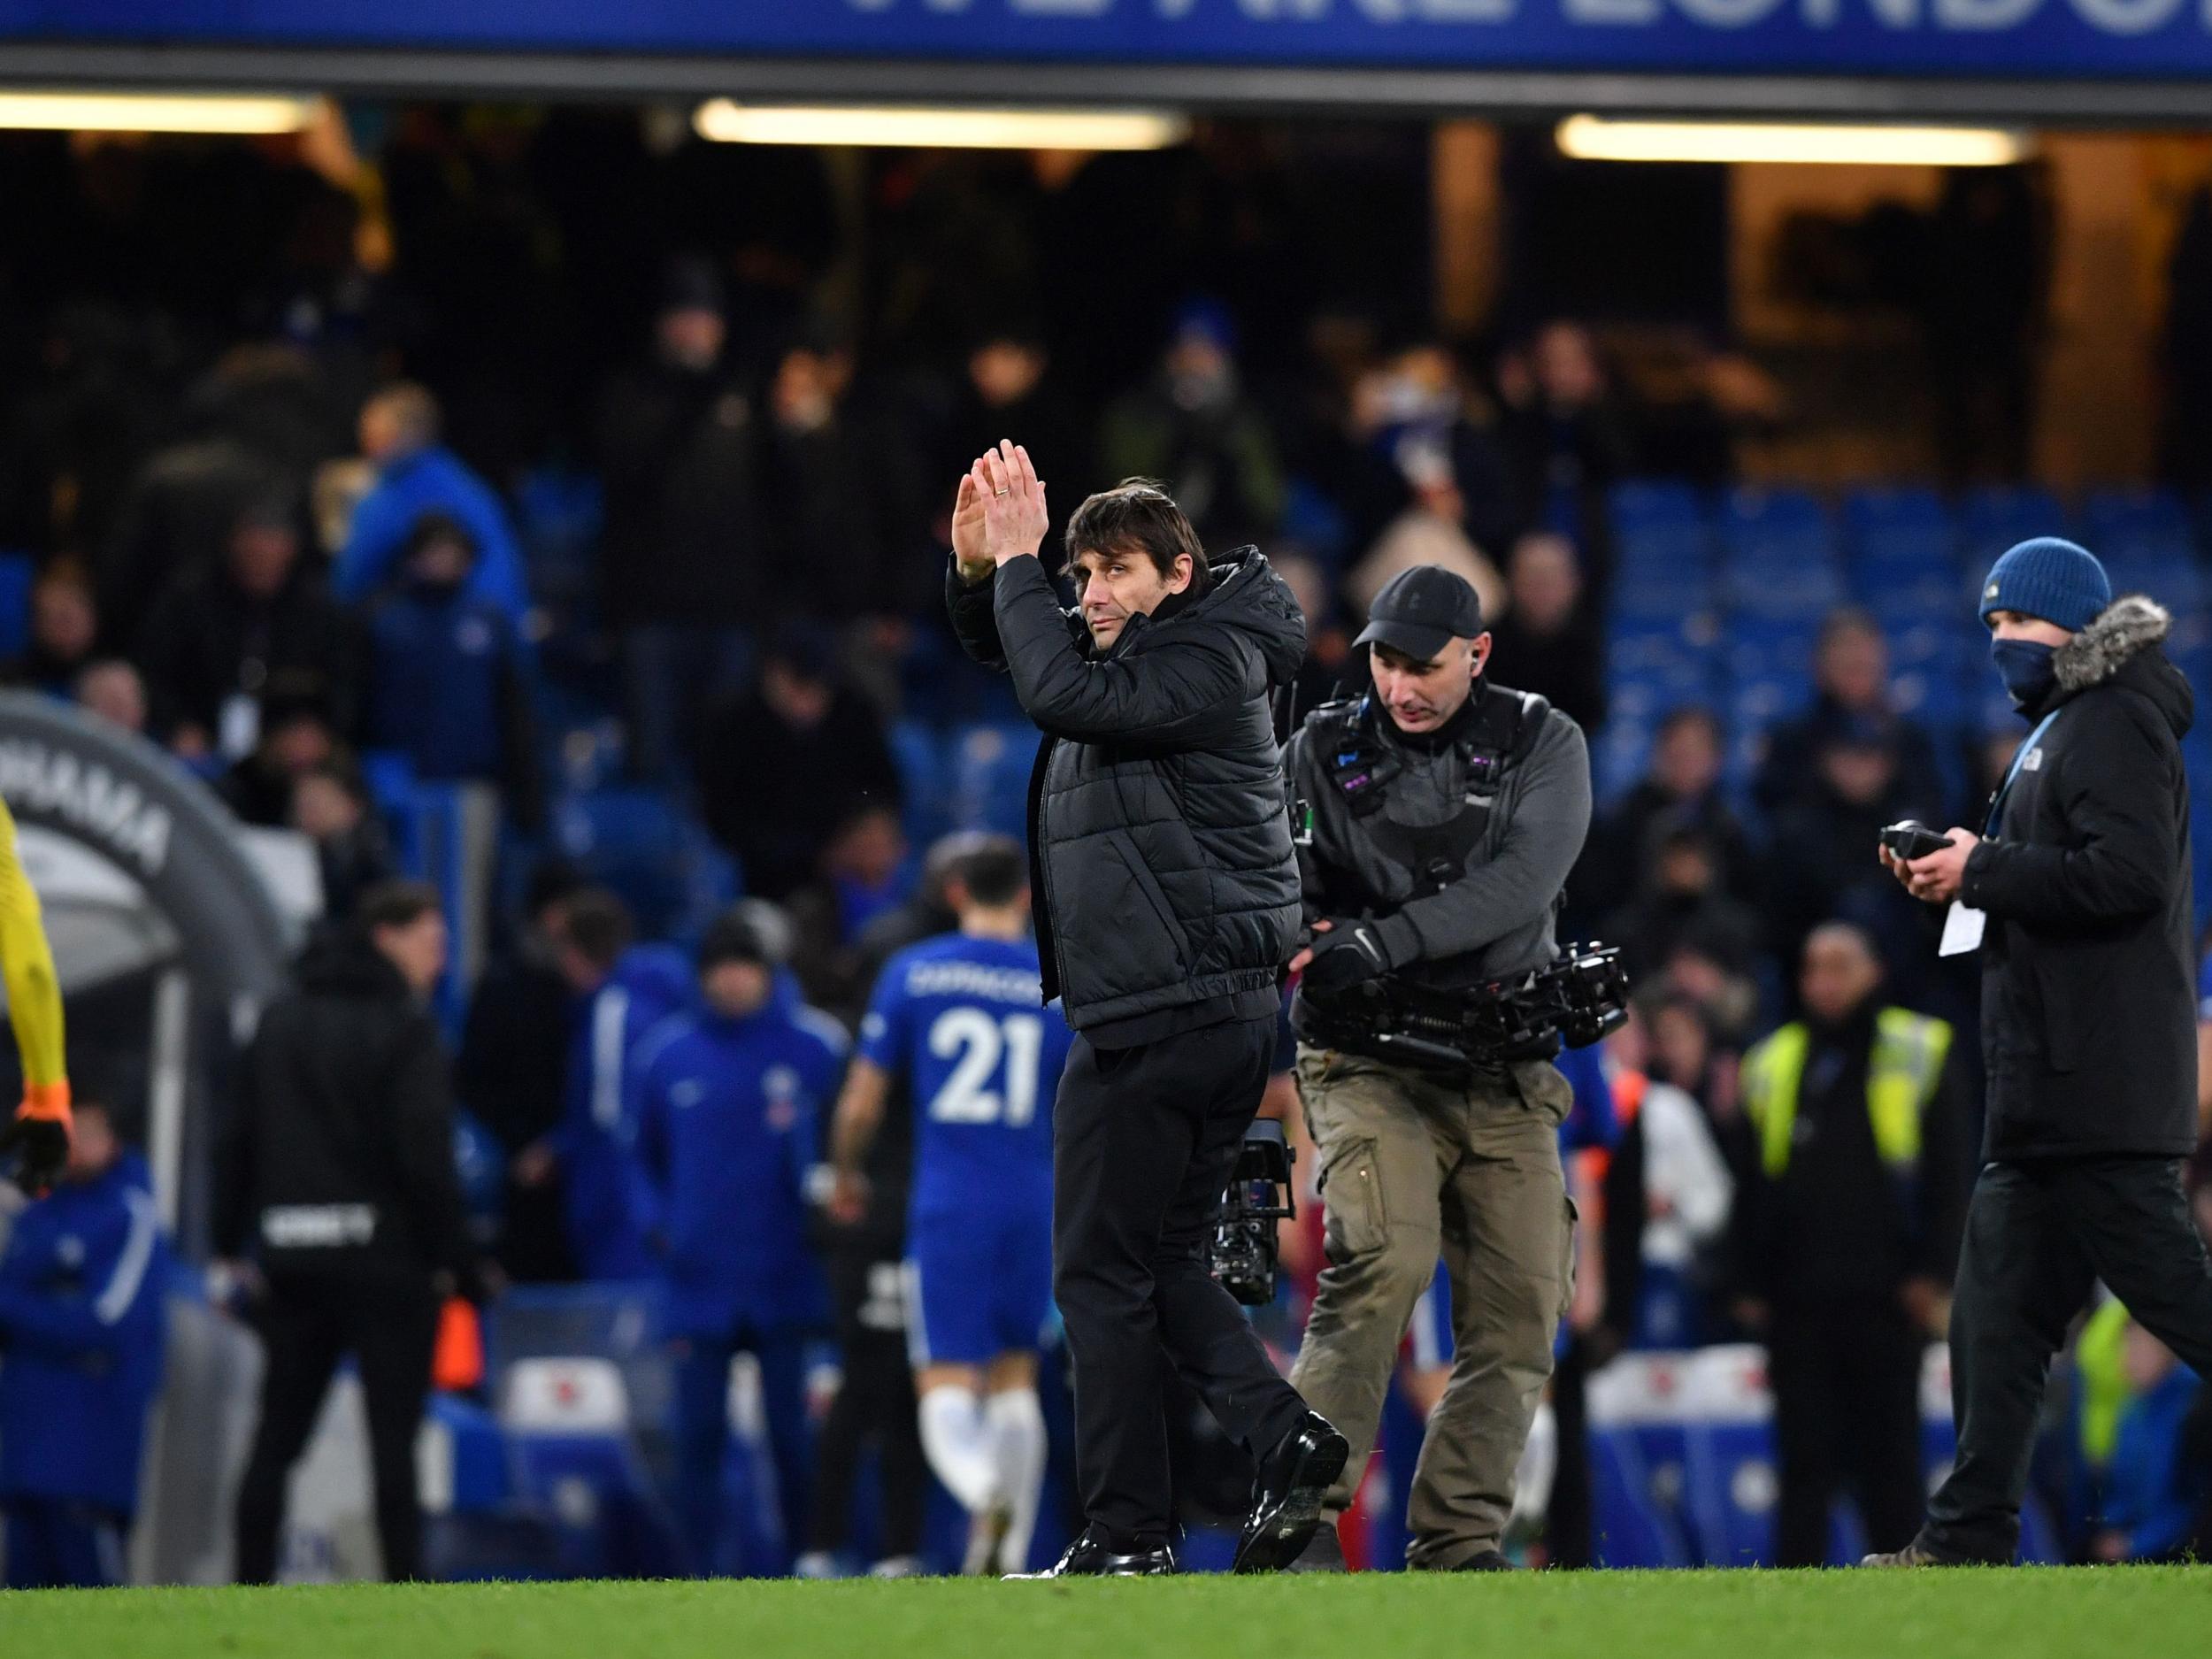 The pressure on Conte was relieved after the three points